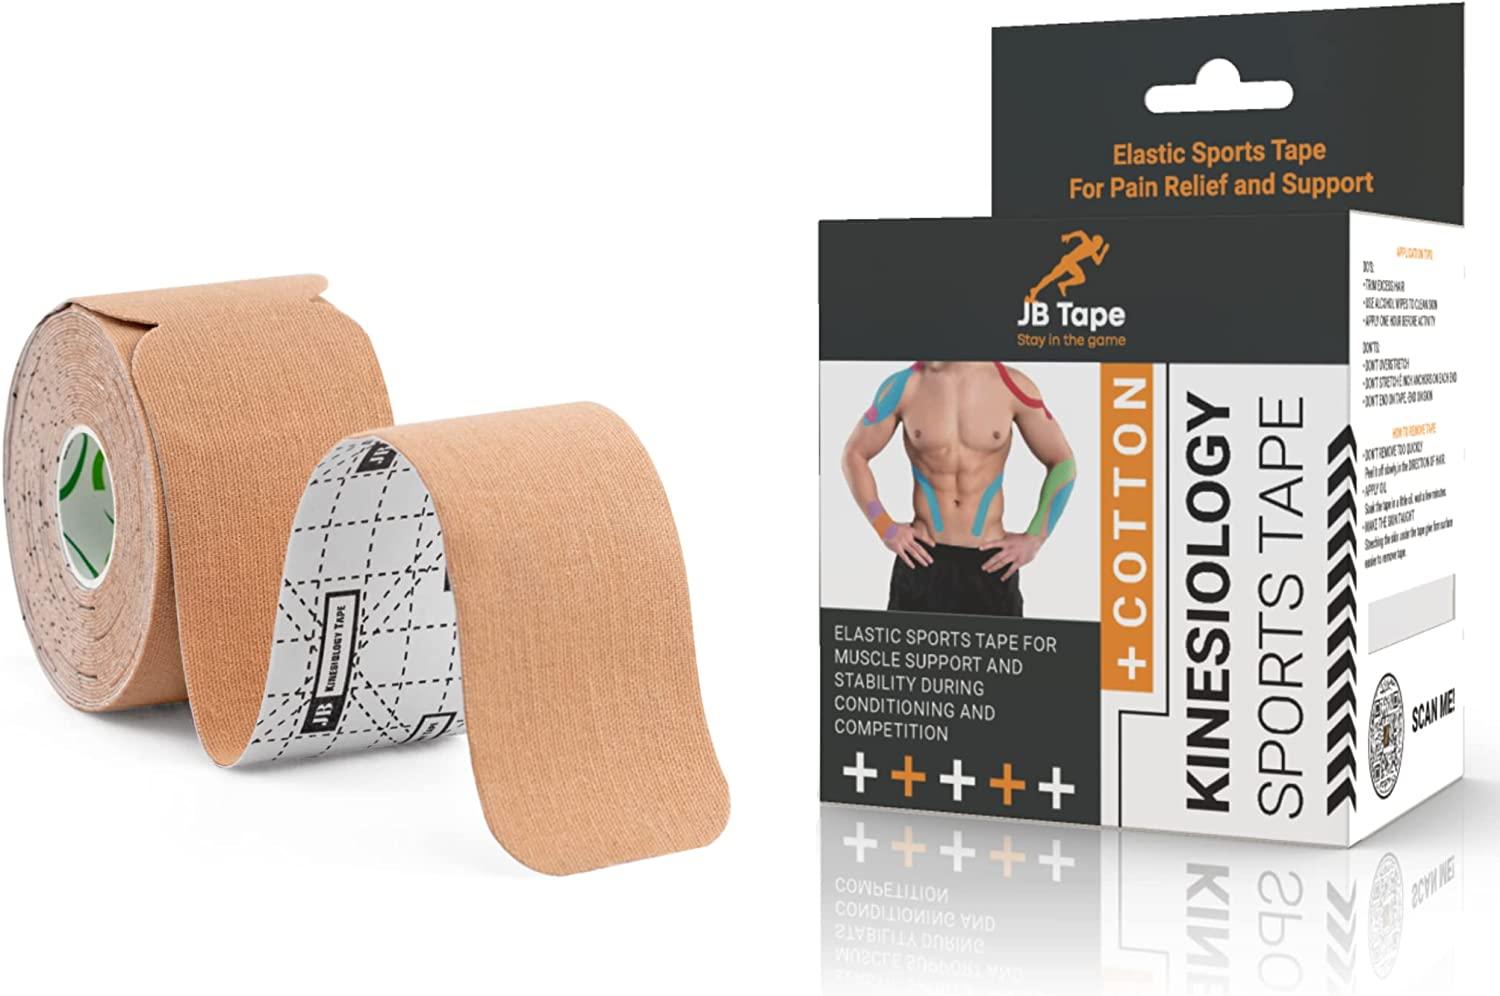 Soothe Pregnancy Pain with Kinesiology Tape and RockTape! – RockTape New  Zealand